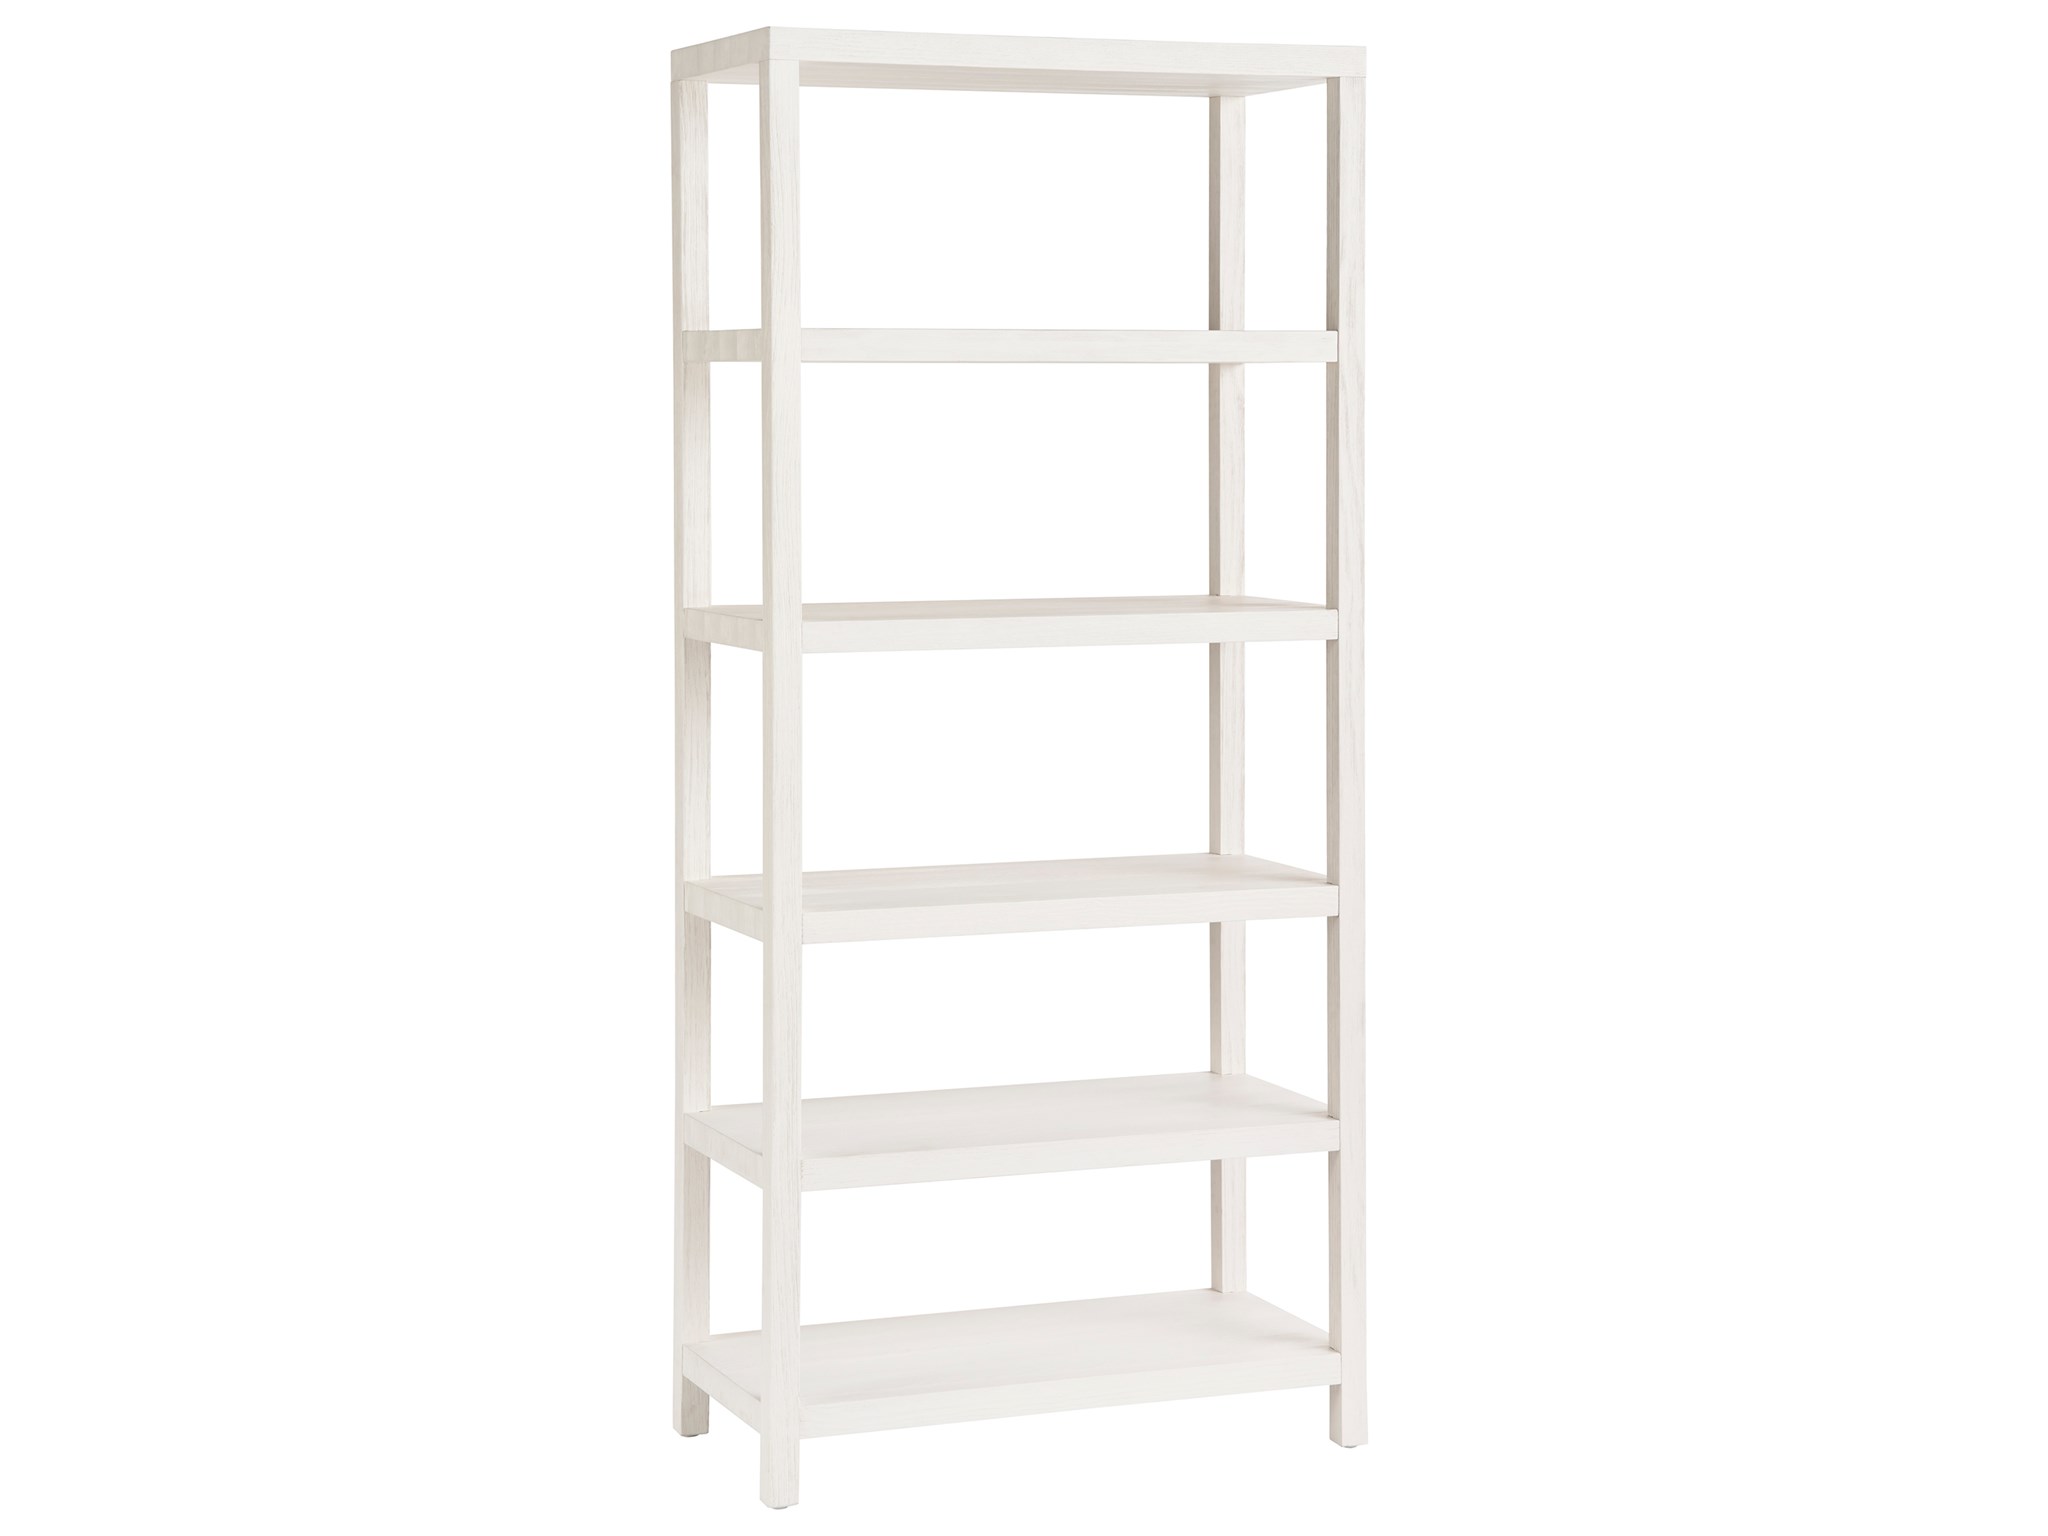 Weekender Coastal Living Home Collection Boothbay Etagere